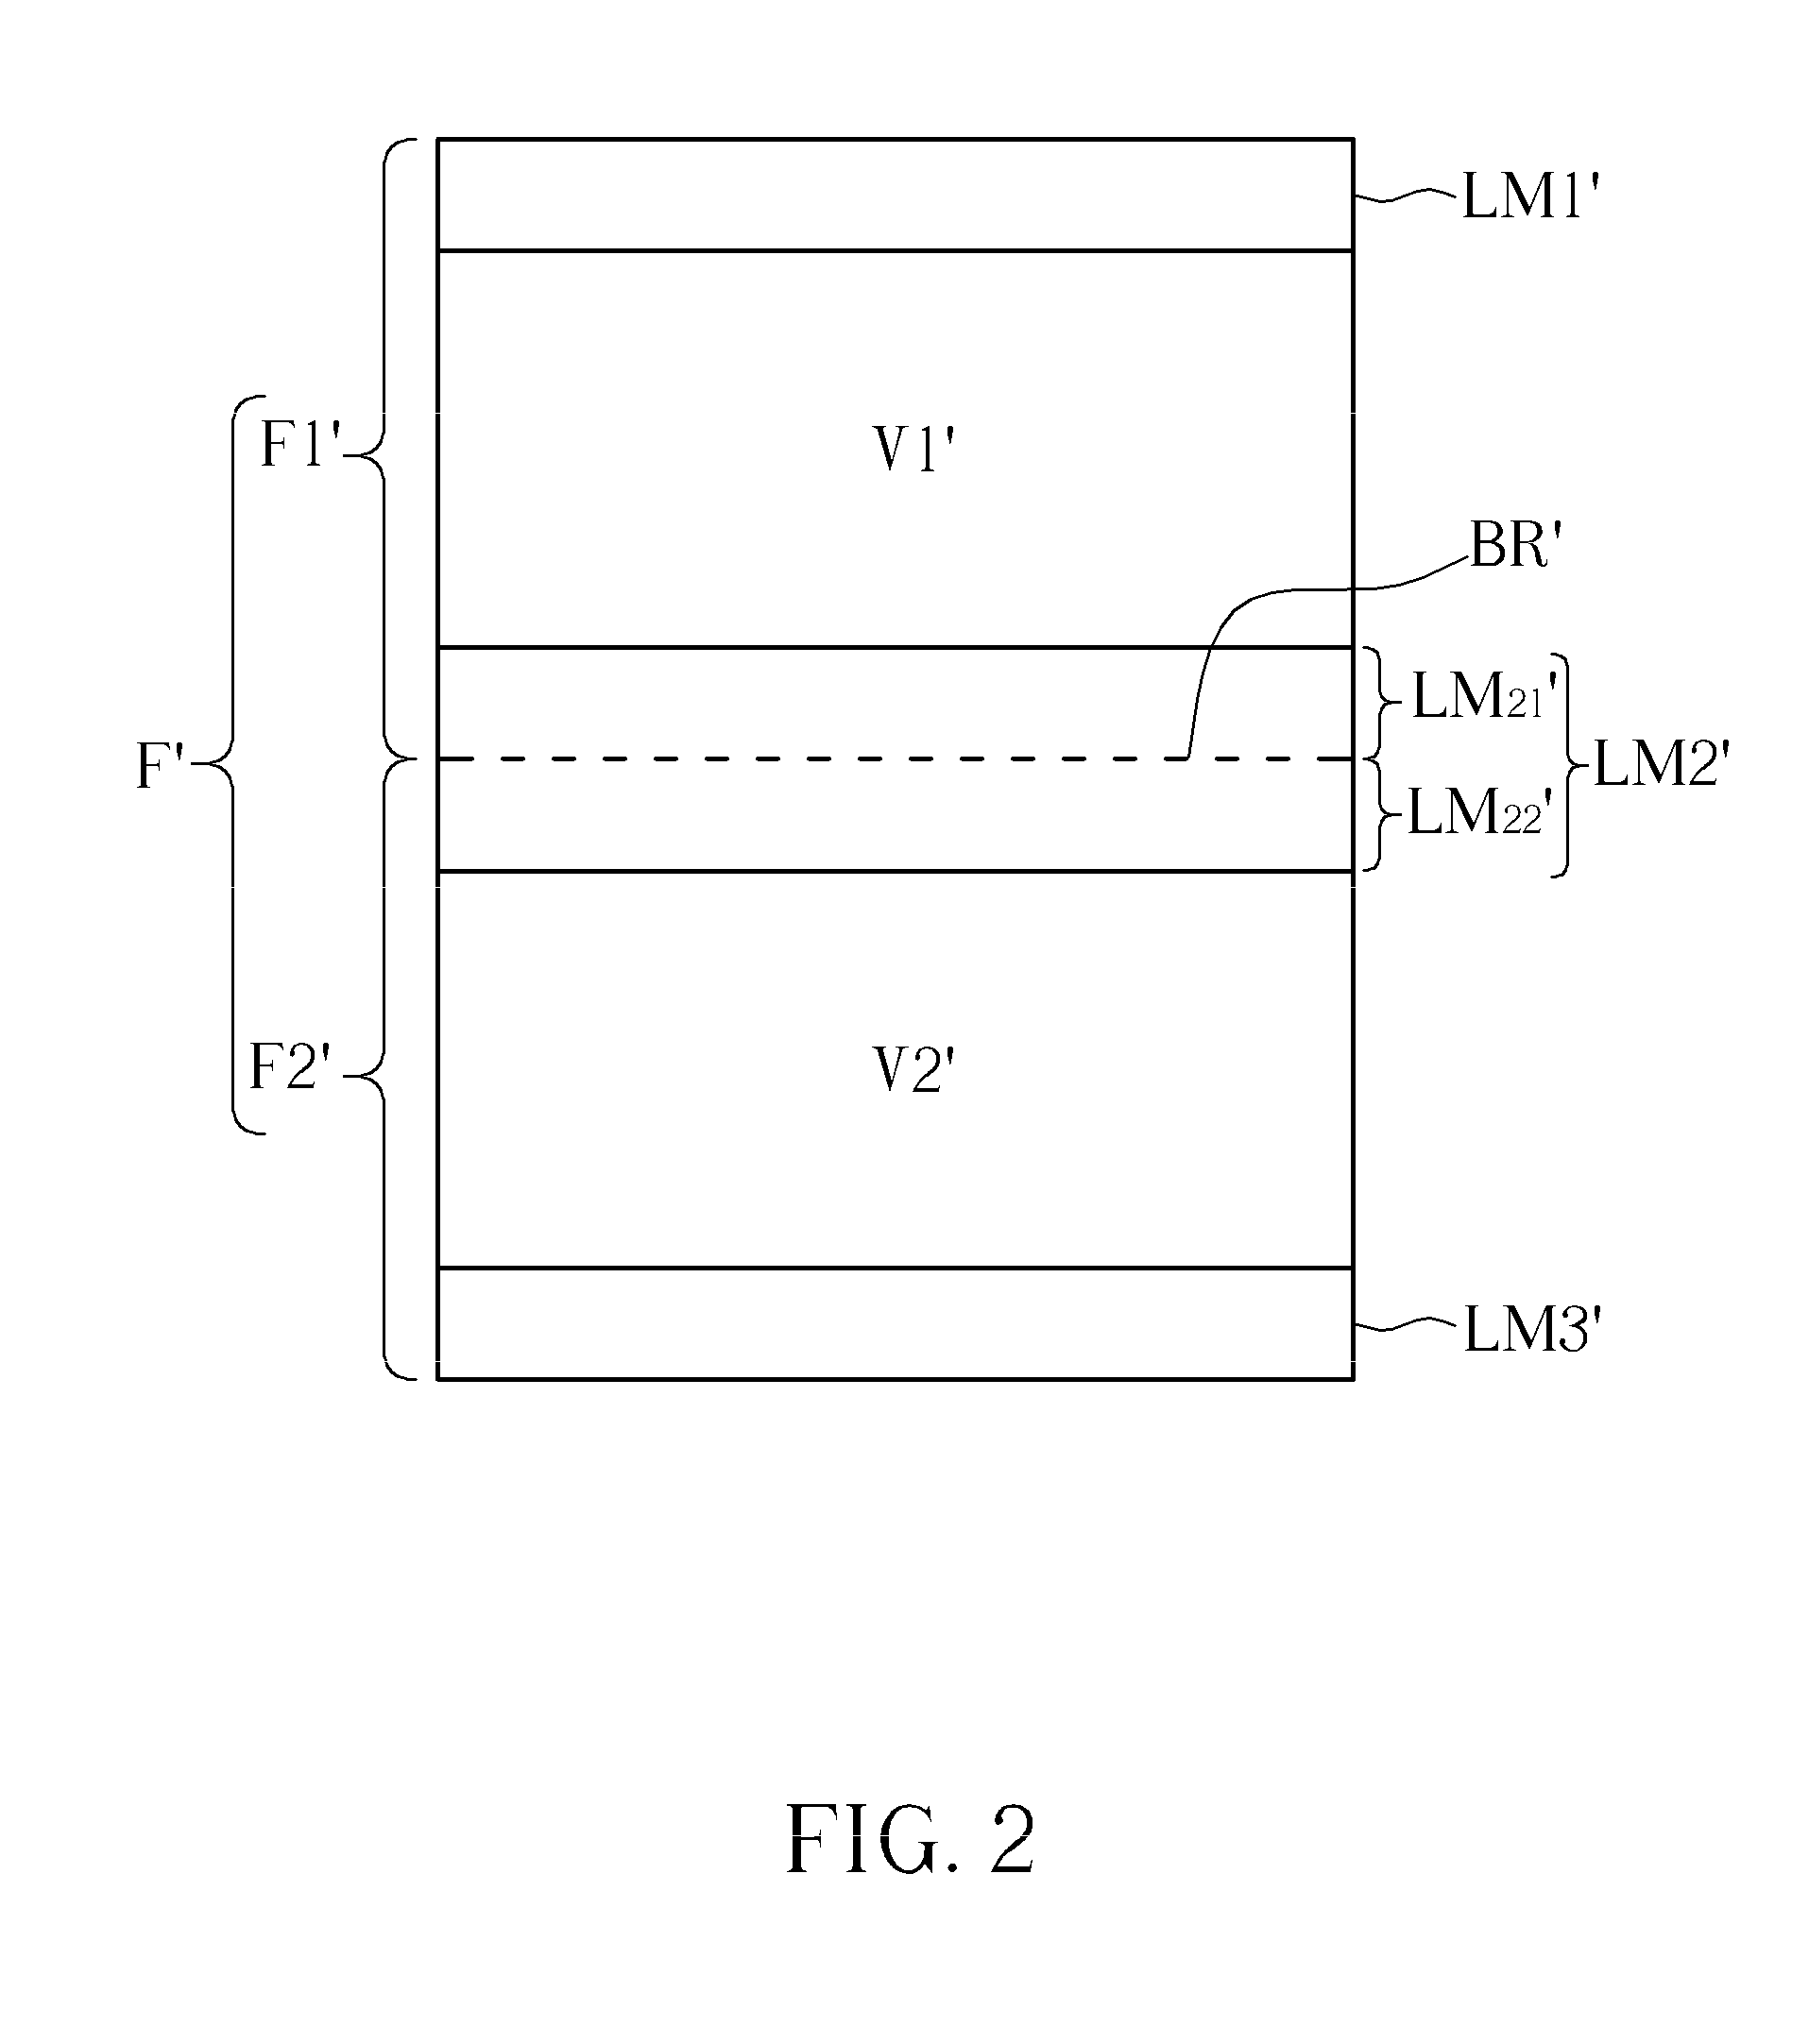 Letterbox margin processing method for identifying letterbox margins of target frame according to frame packing type corresponding to 3D video input and related letterbox margin processing apparatus thereof